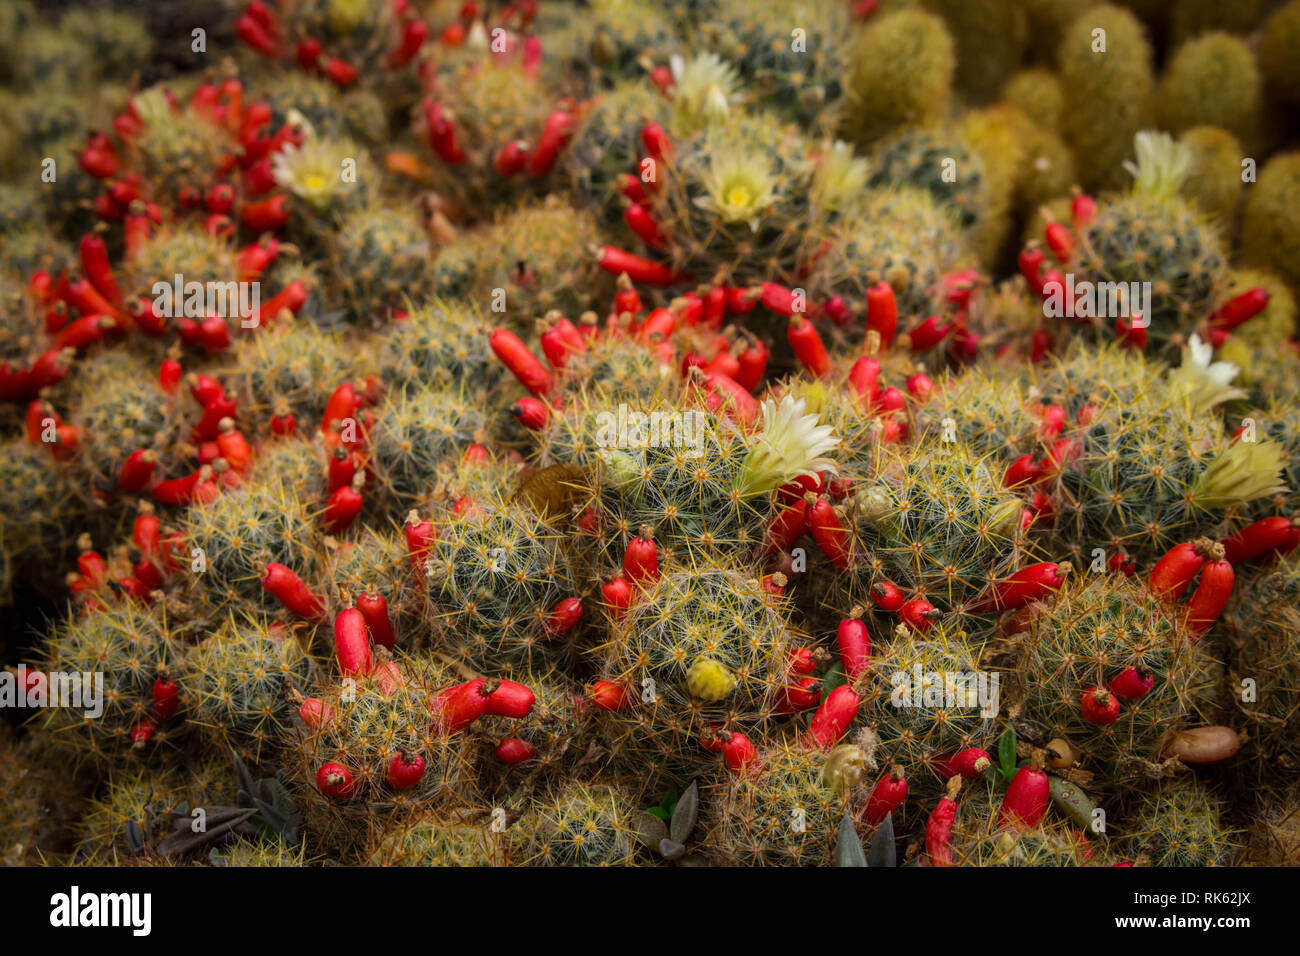 Common cacti Mammillaria prolifera with flowers and red fruits Stock Photo